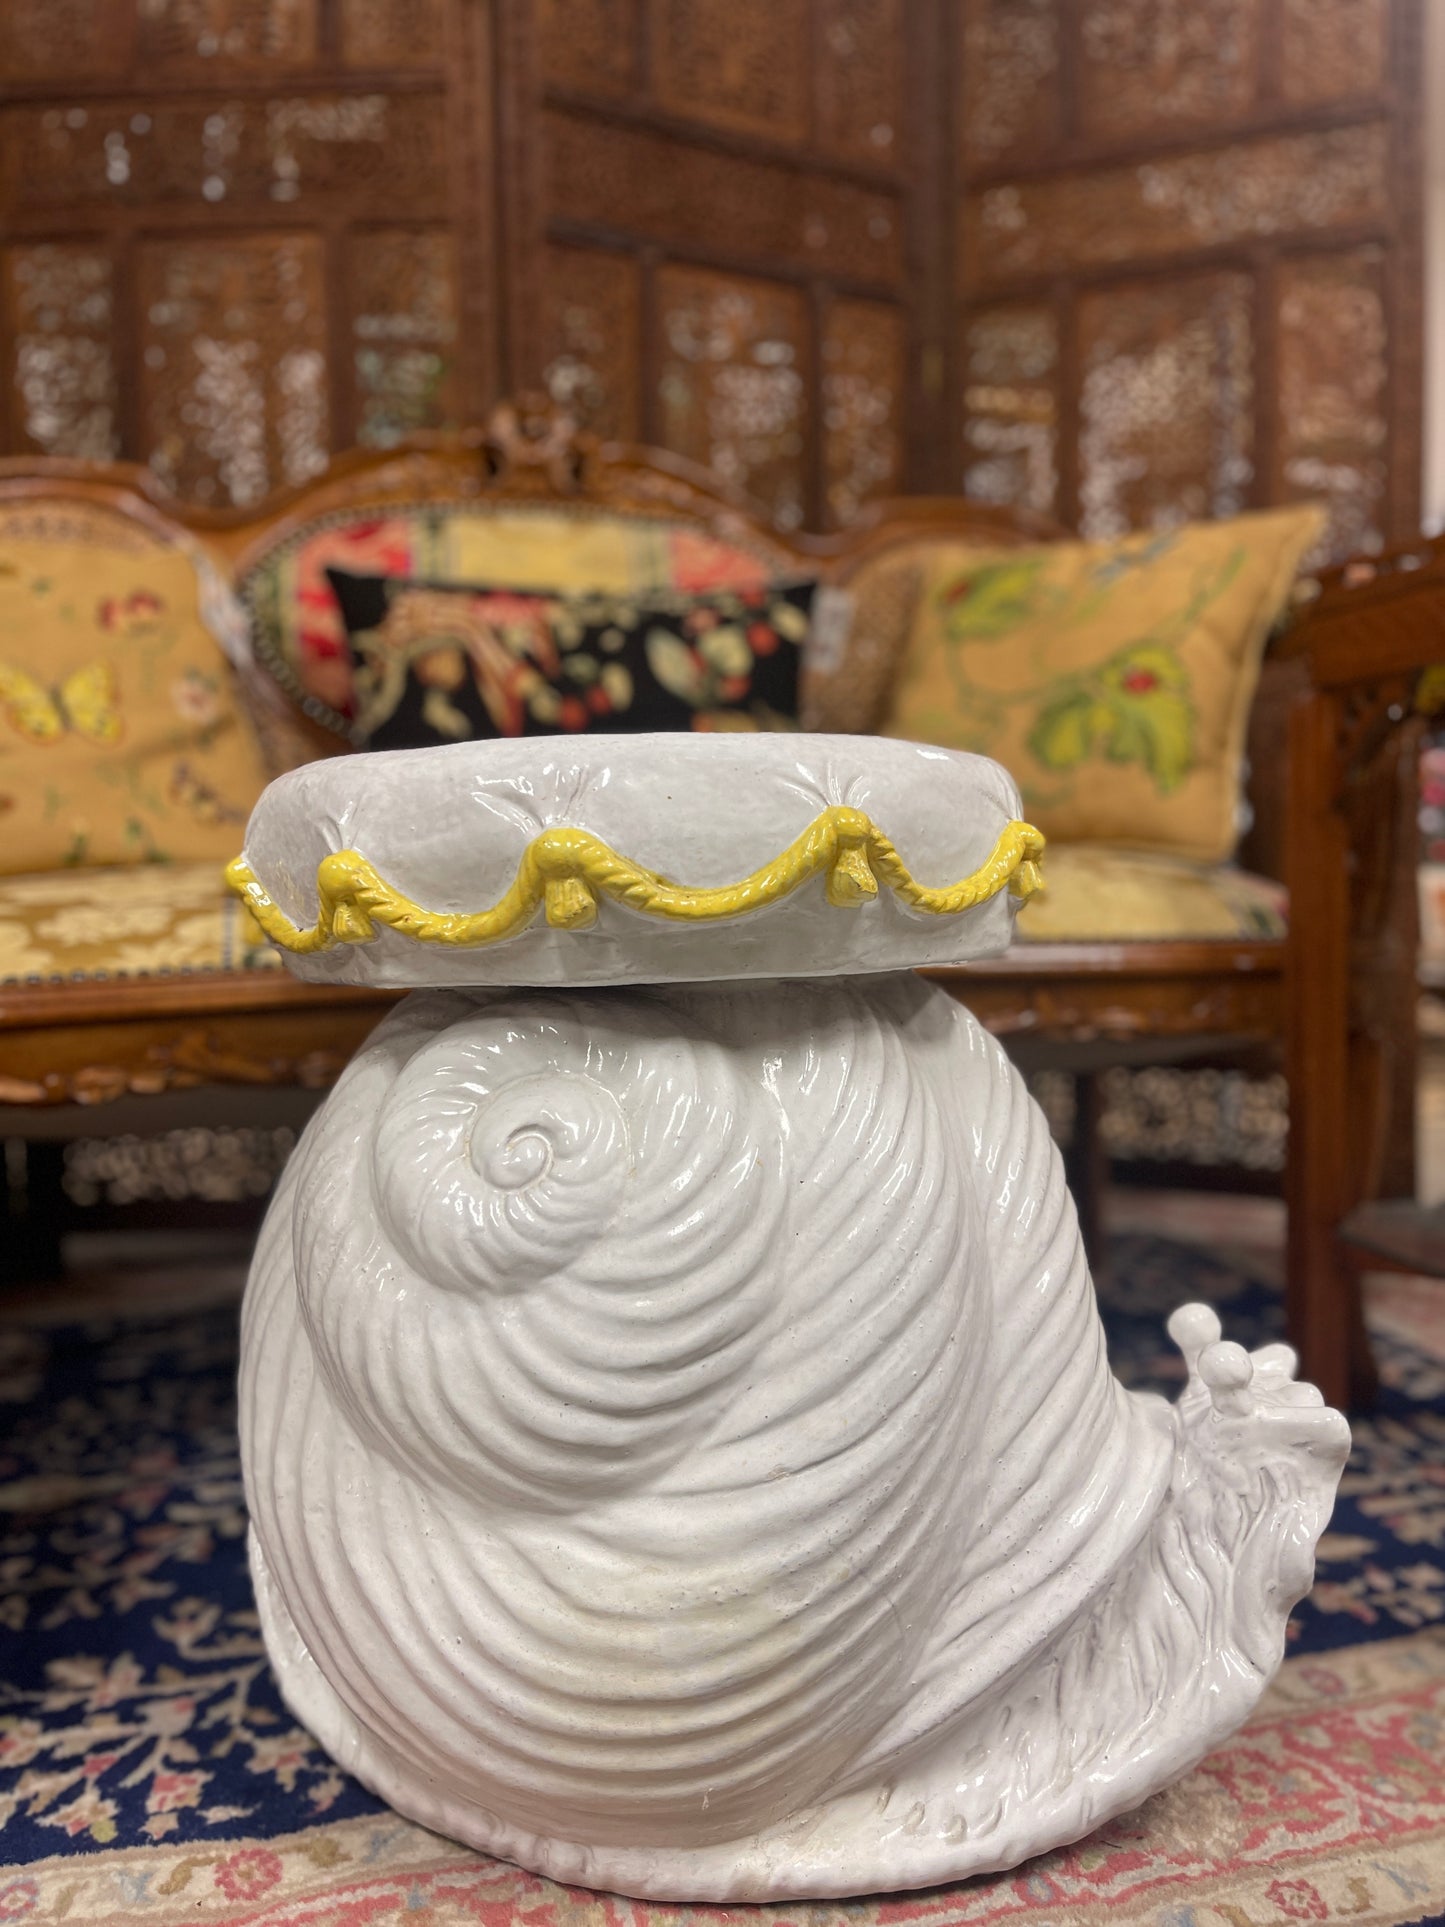 Italian Snail Side Table/Garden Stool with a Tufted and Tasseled Pillow, Made in Italy, Vintage